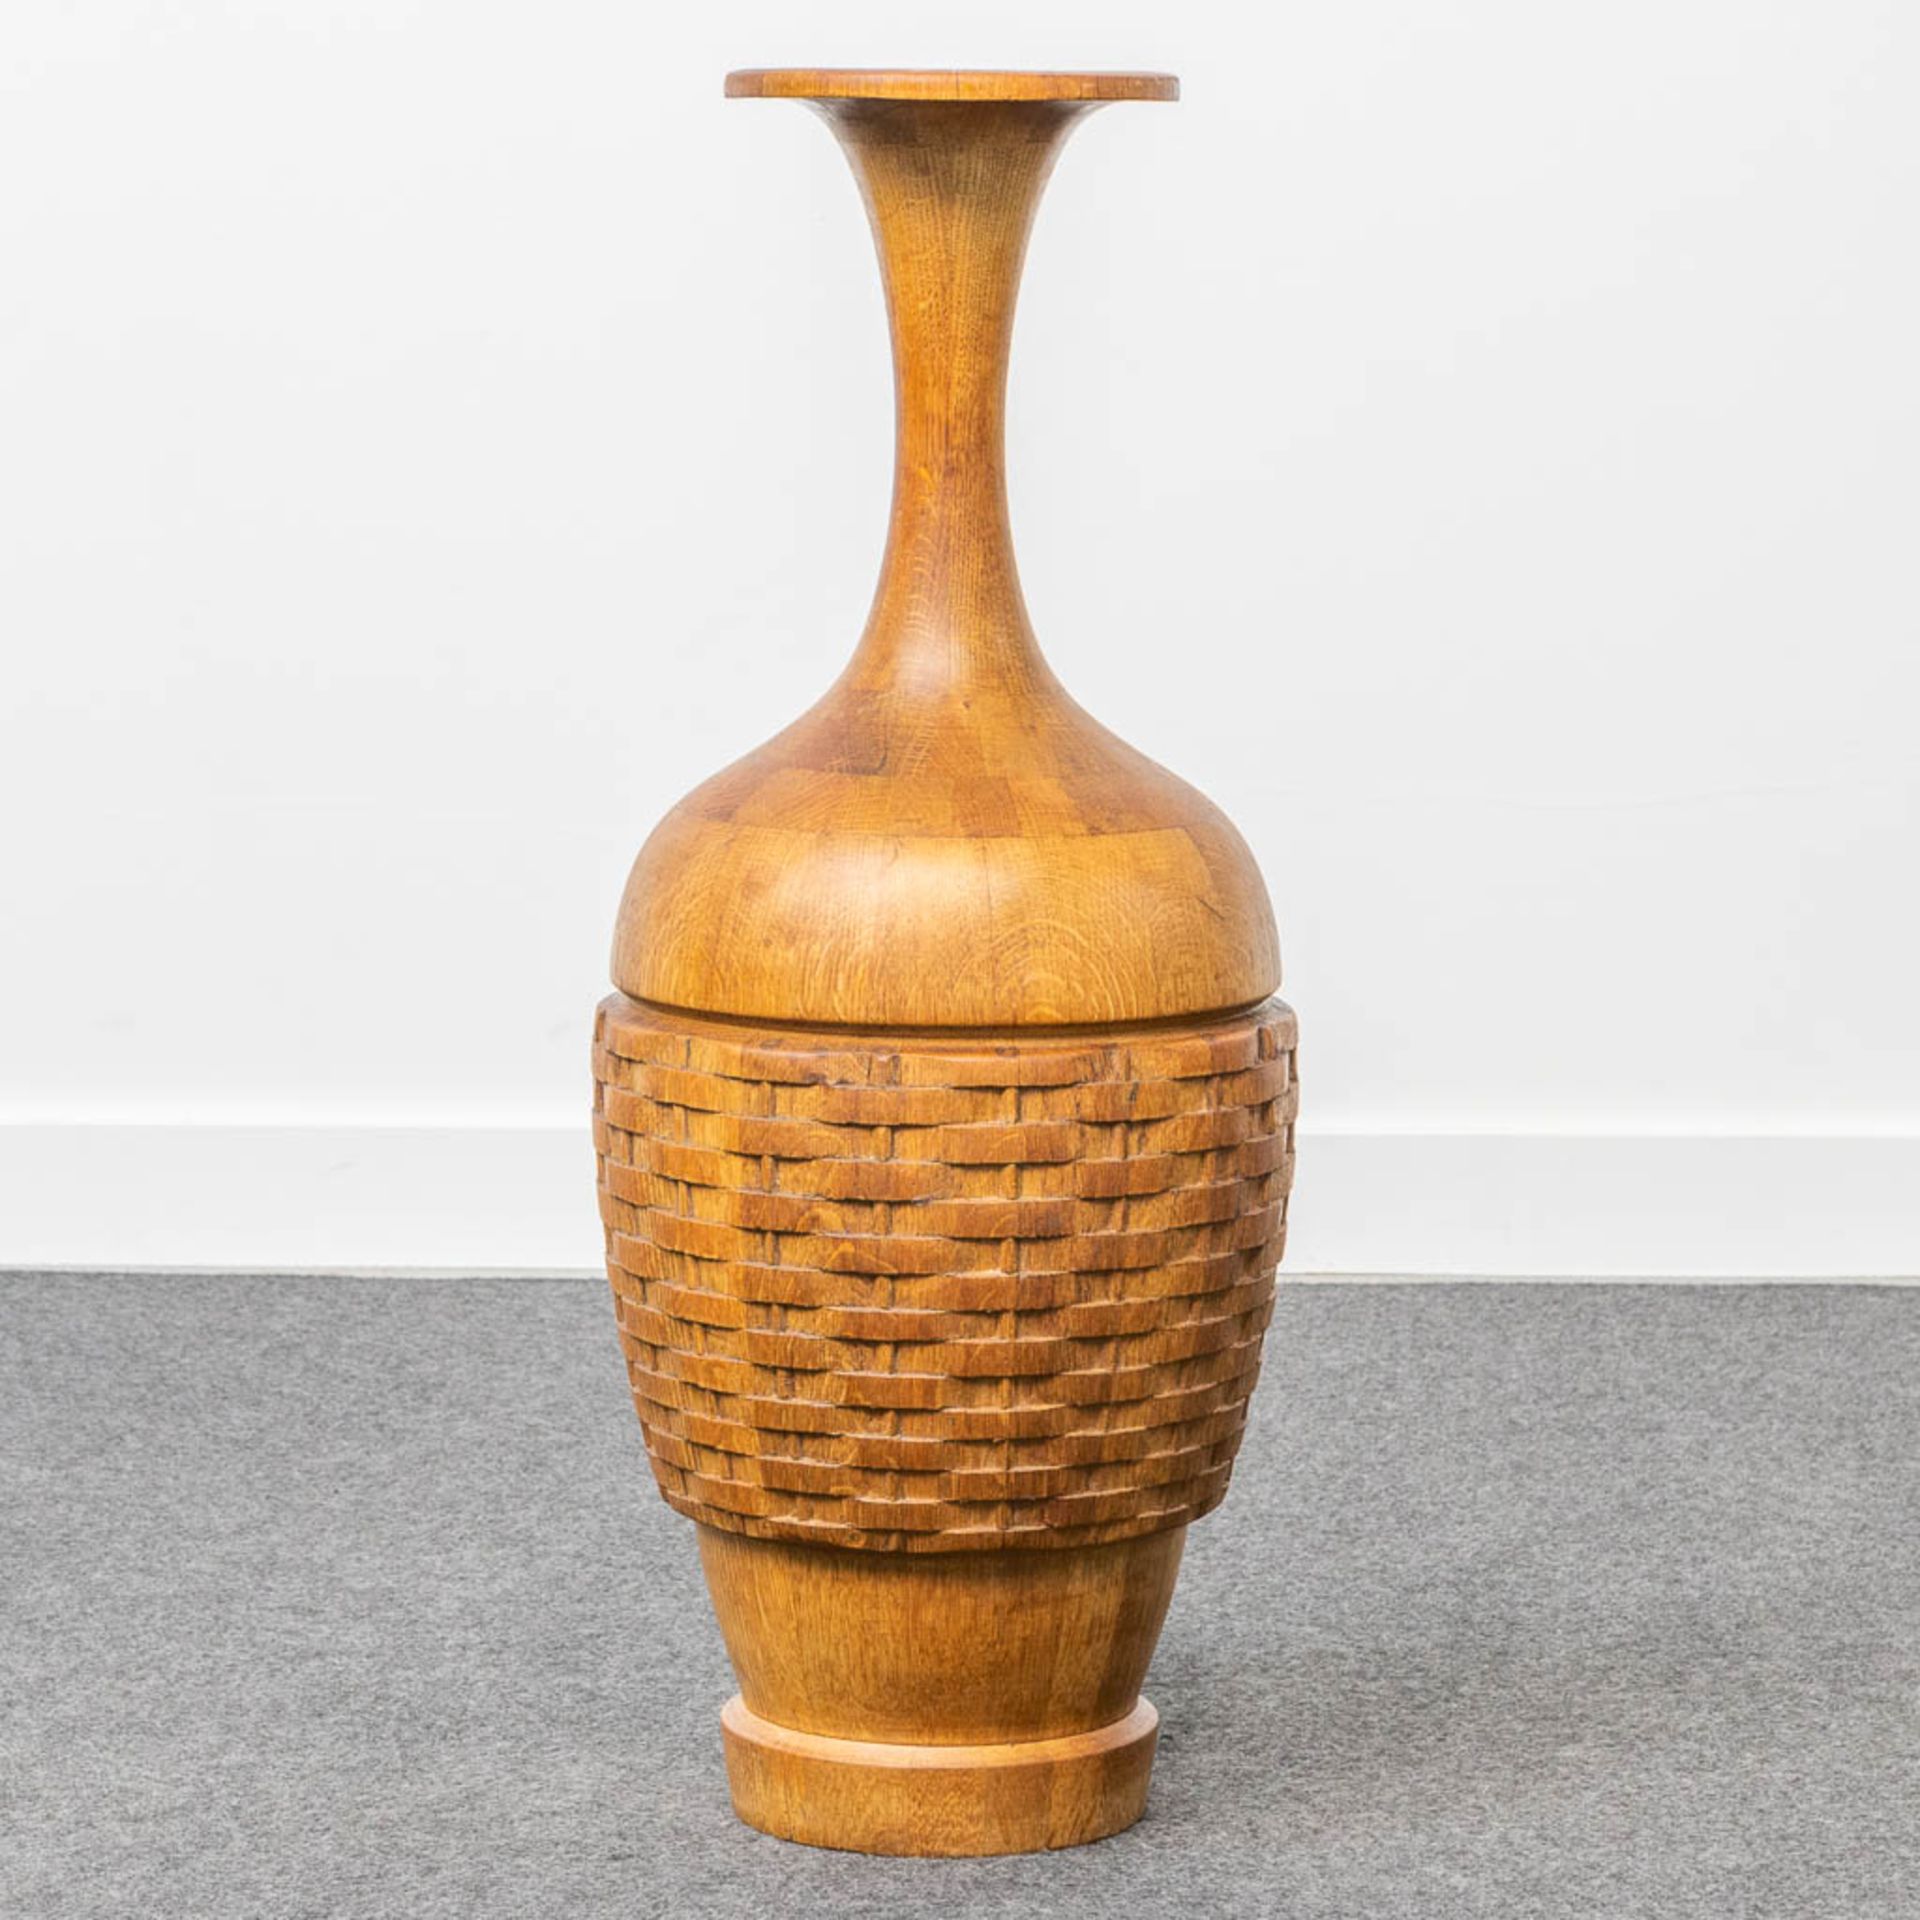 A collection of 4 wood-turned vases with inlay, made by DeCoene in Kortijk, Belgium. - Image 7 of 11